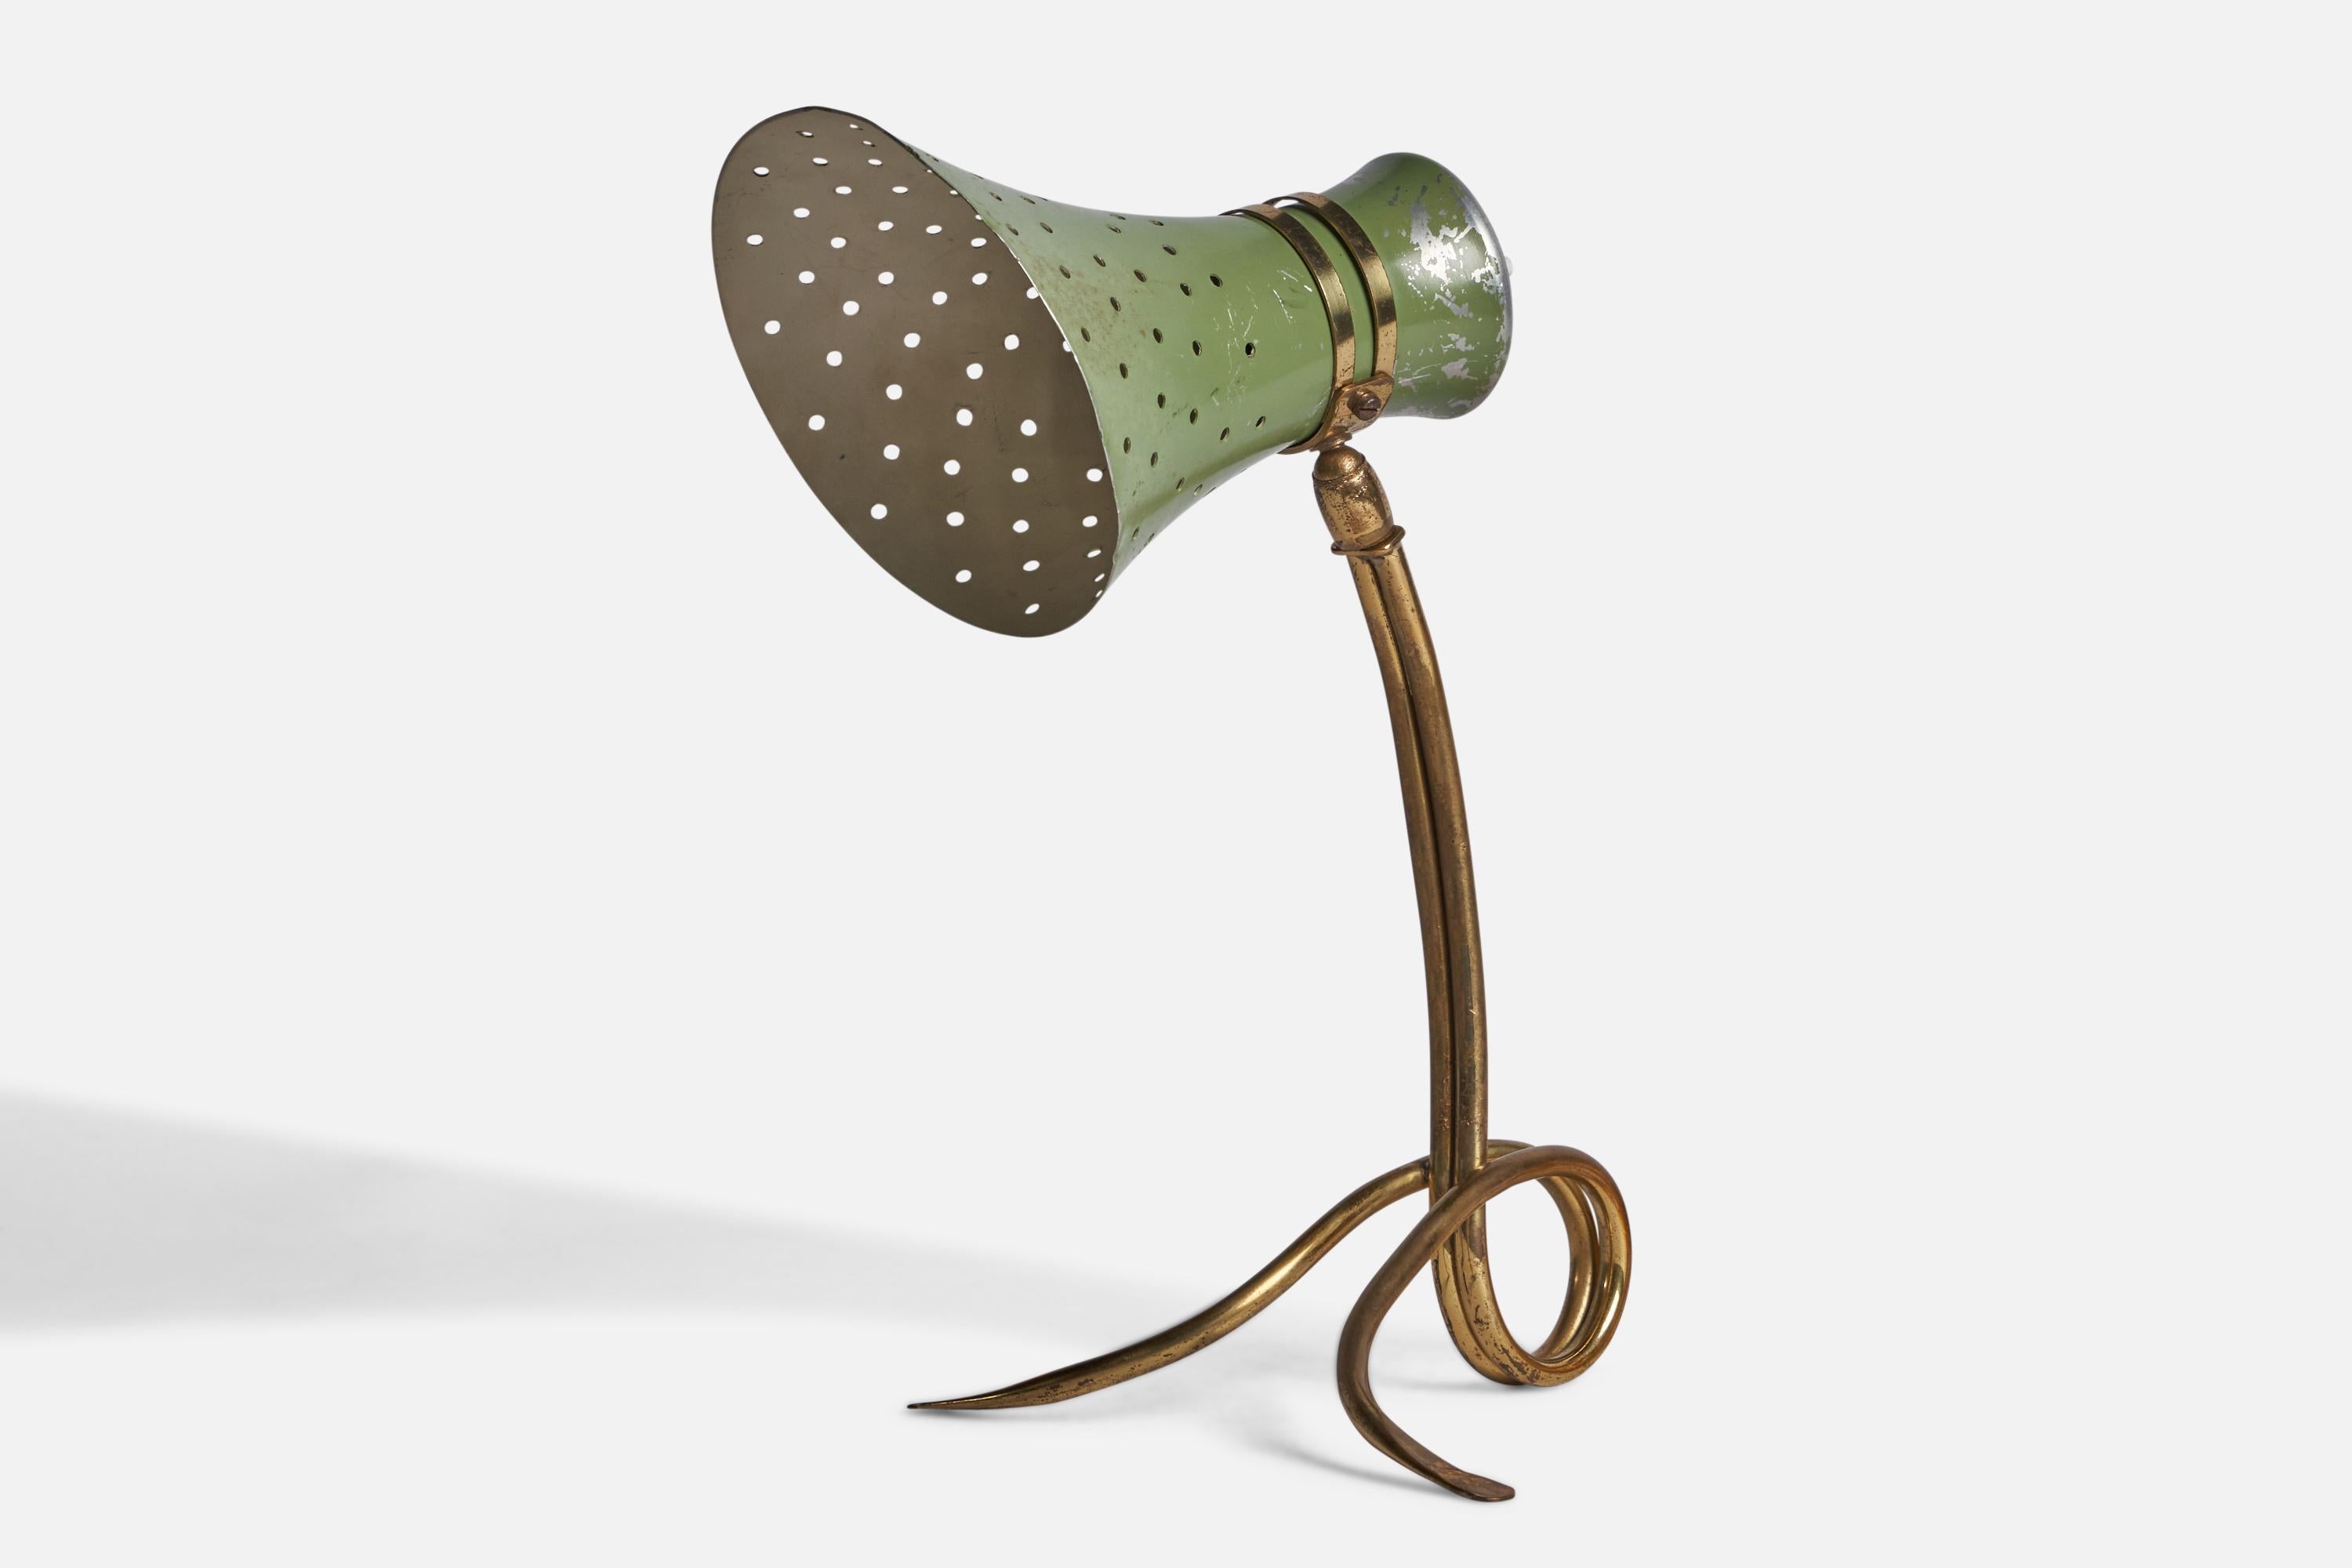 A brass and green-lacquered metal table lamp designed and produced in Italy, 1940s.
Overall Dimensions (inches): 12.5